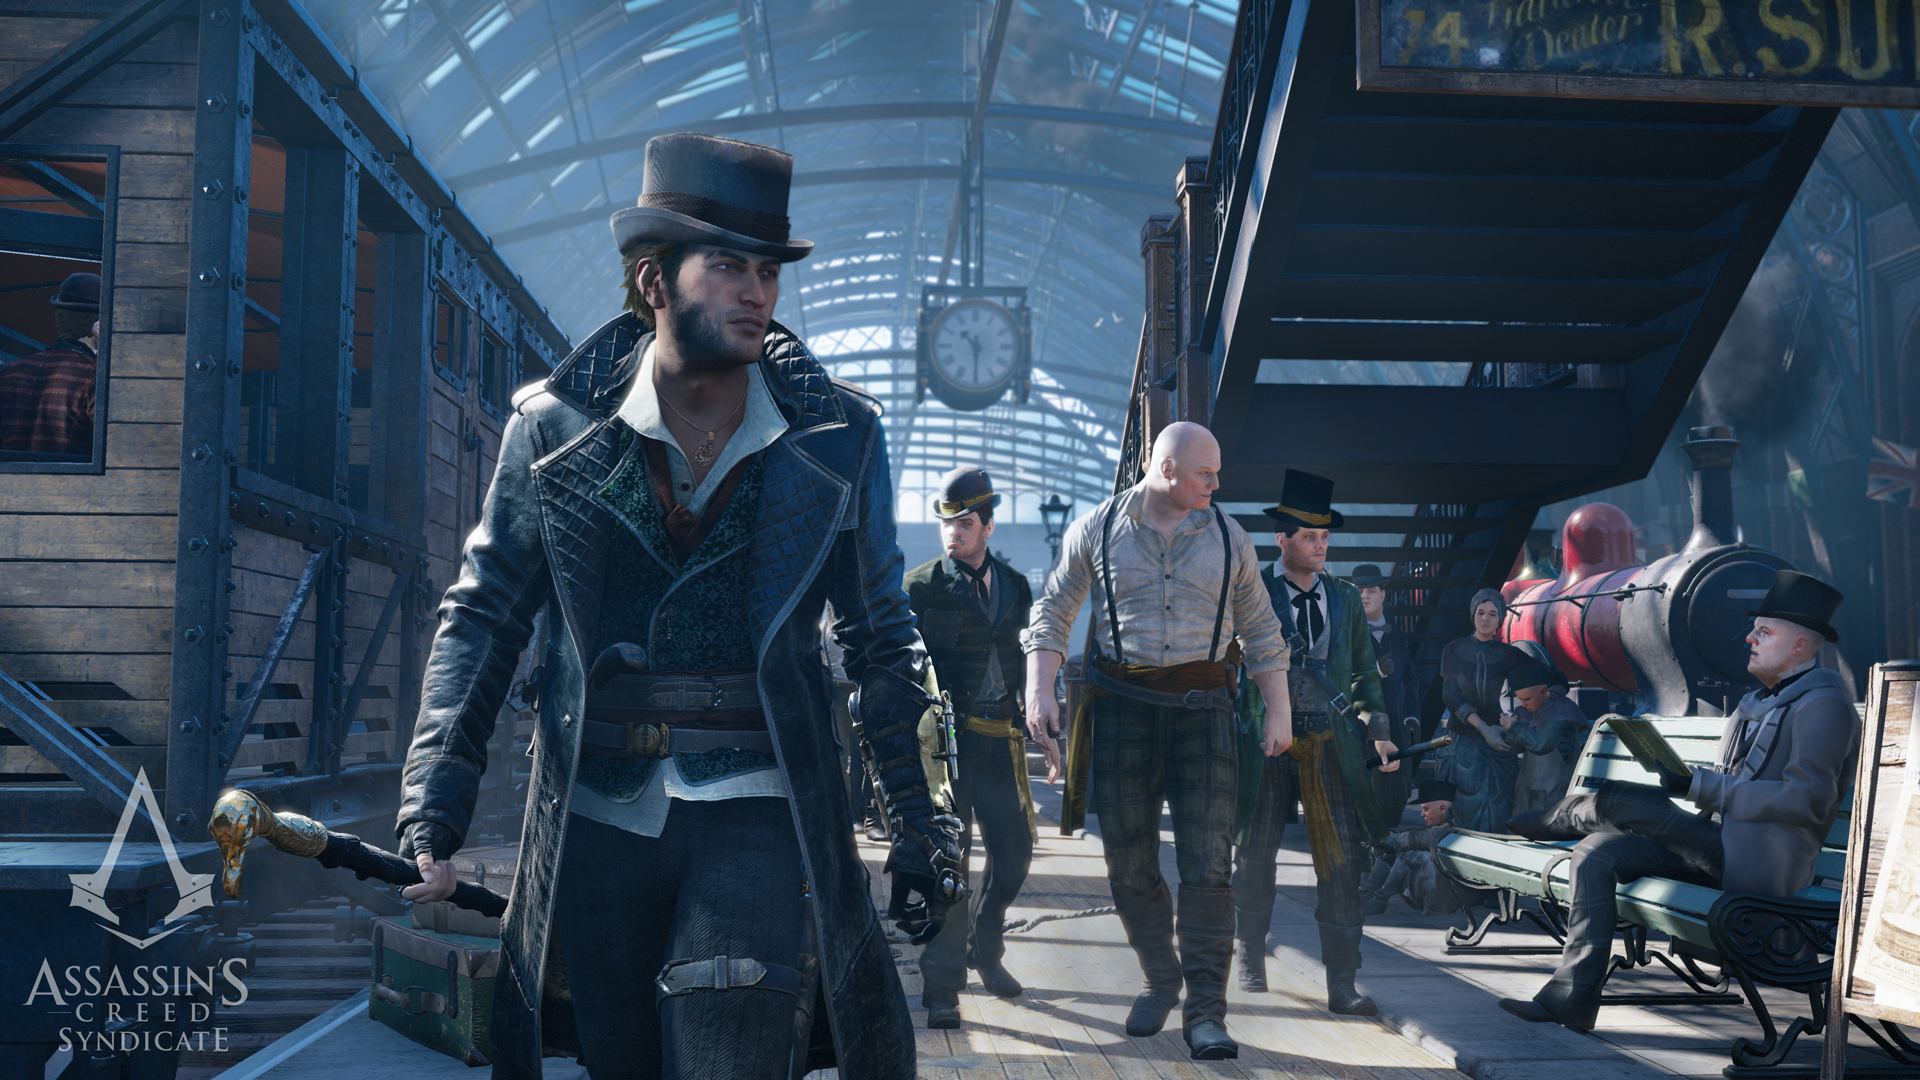 Assassin's Creed Syndicate - Wikipedia